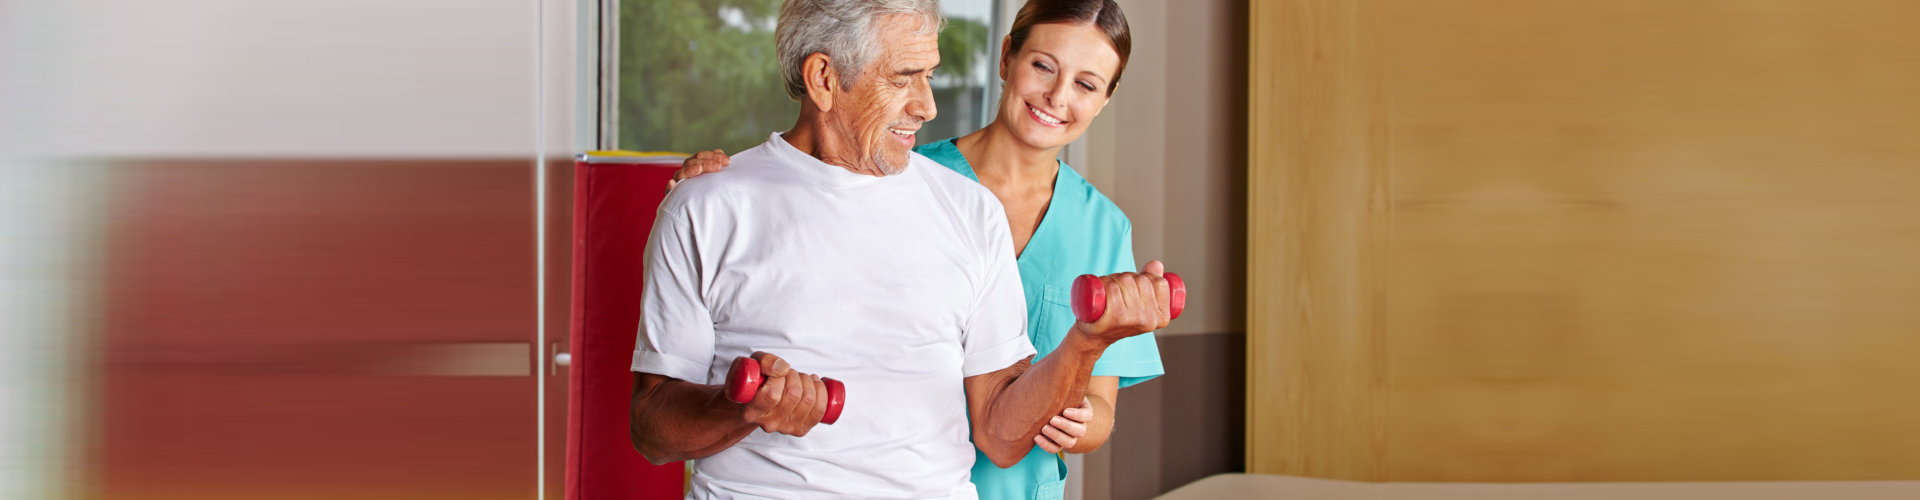 senior man with dumbbells assisting by the occupational therapist